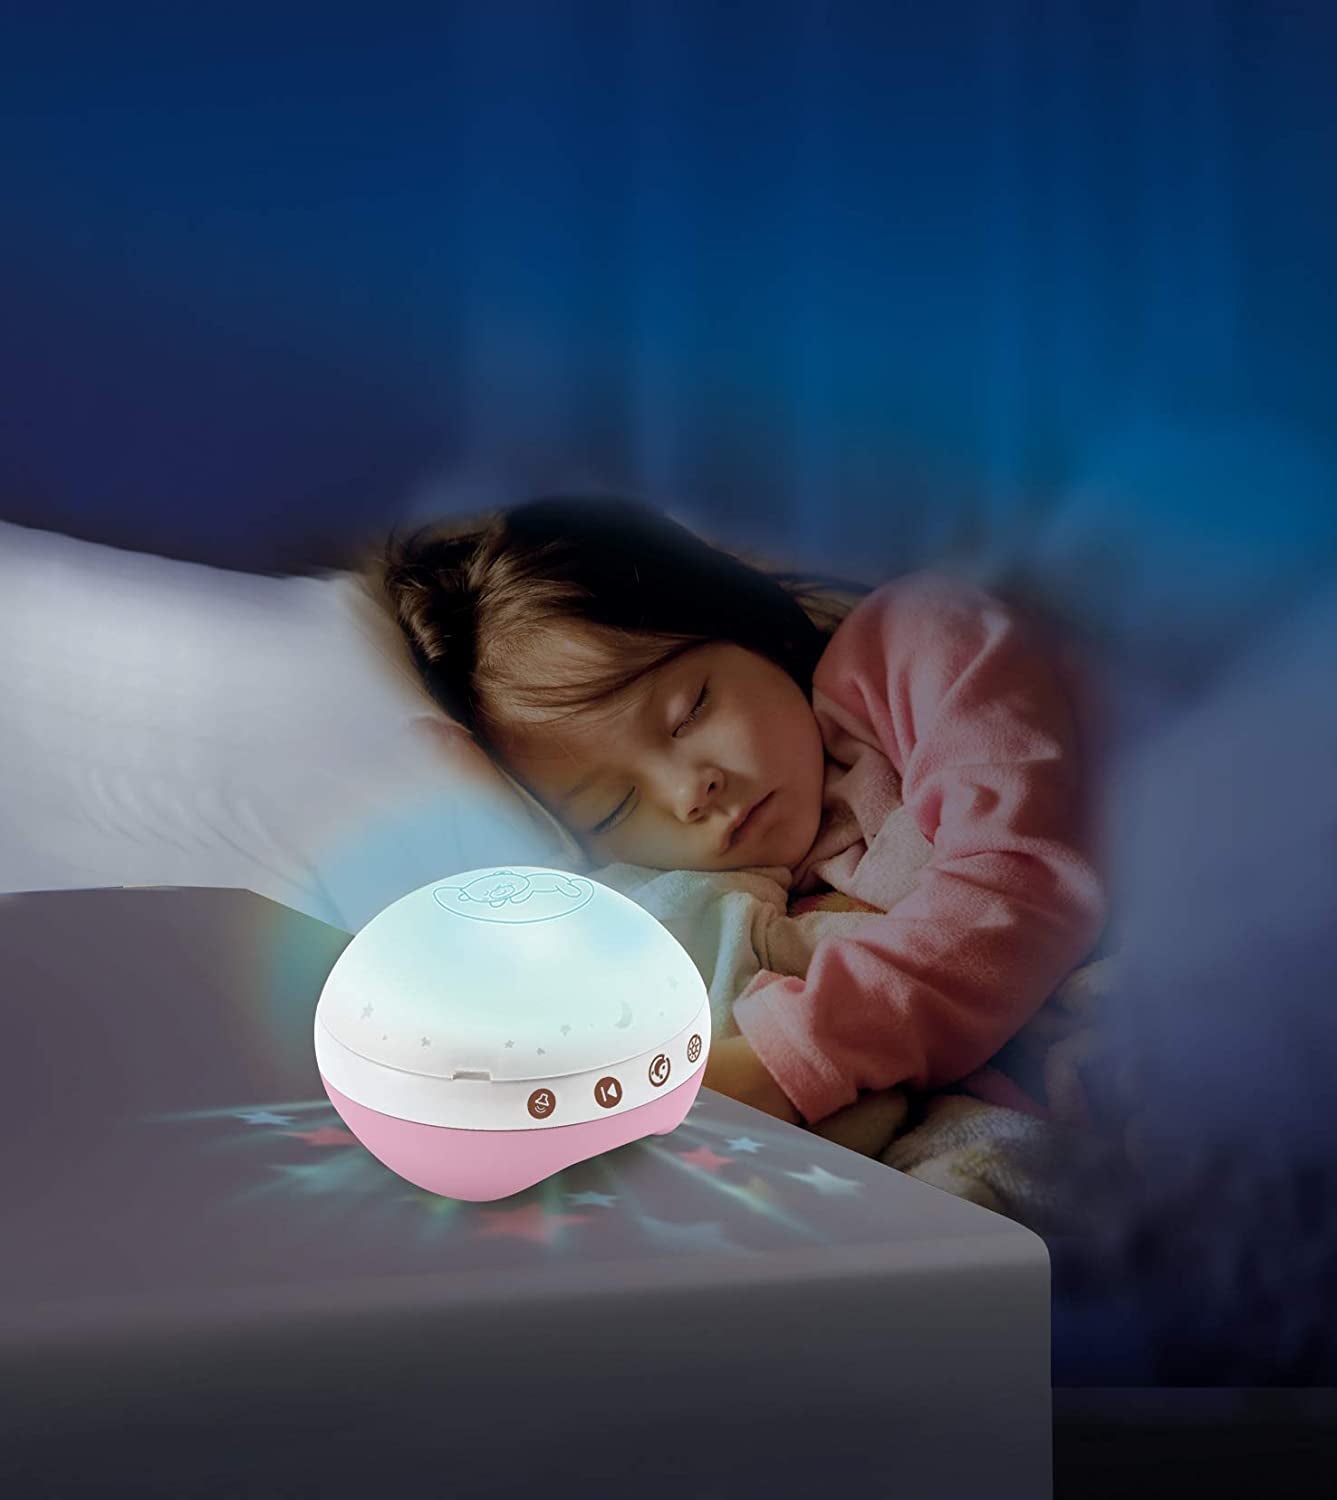 INFANTINO 3 in 1 Projector Musical Mobile - Convertible mobile, table and cot light and projector, with wake up mode to simulate daylight, complete with 6 melodies and 4 nature sounds, in pink